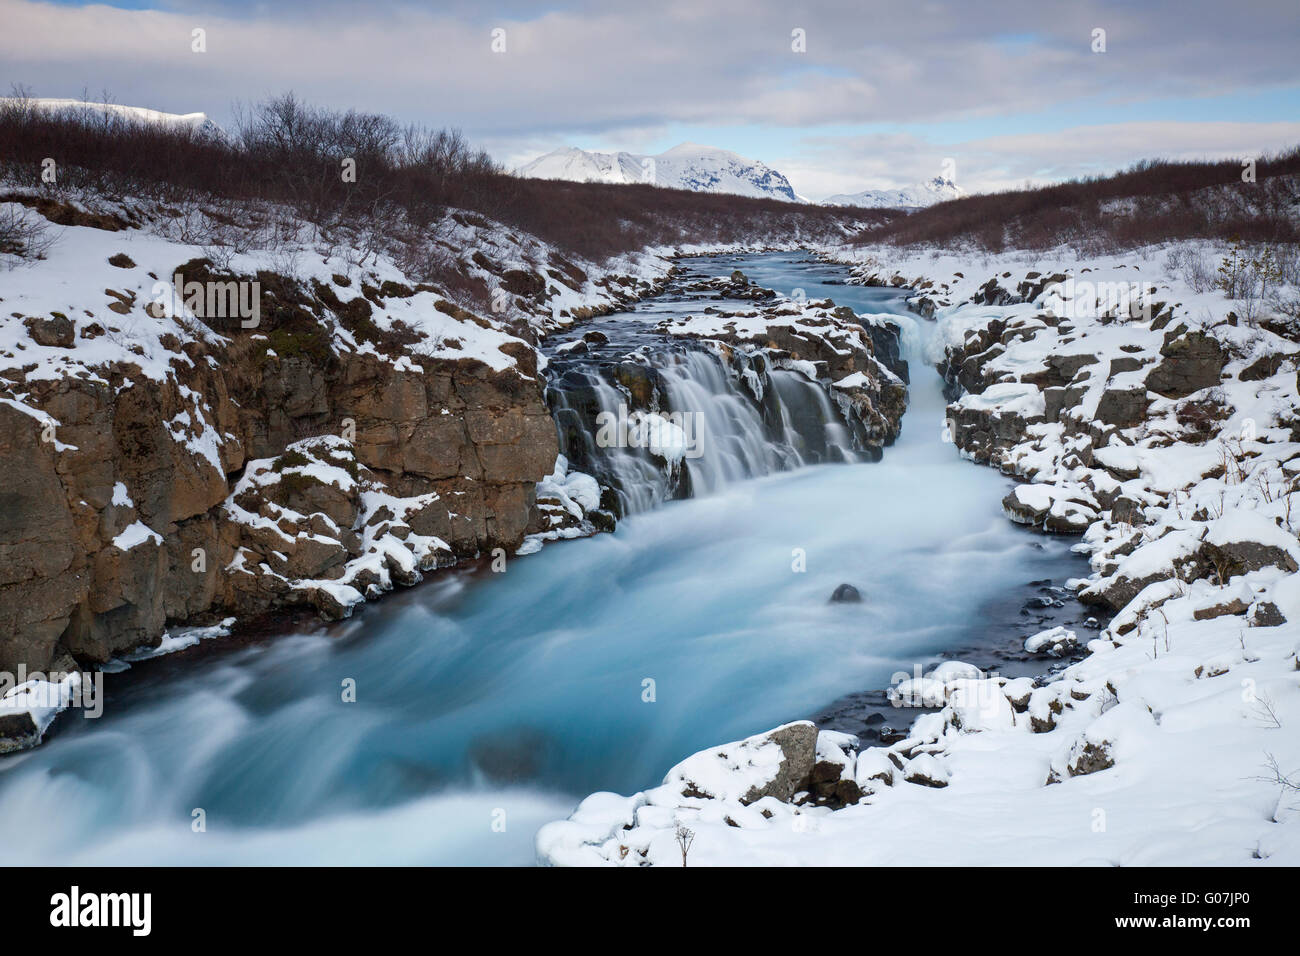 Hlauptungufoss waterfall on the Bruara river in winter, Suedland, Iceland Stock Photo